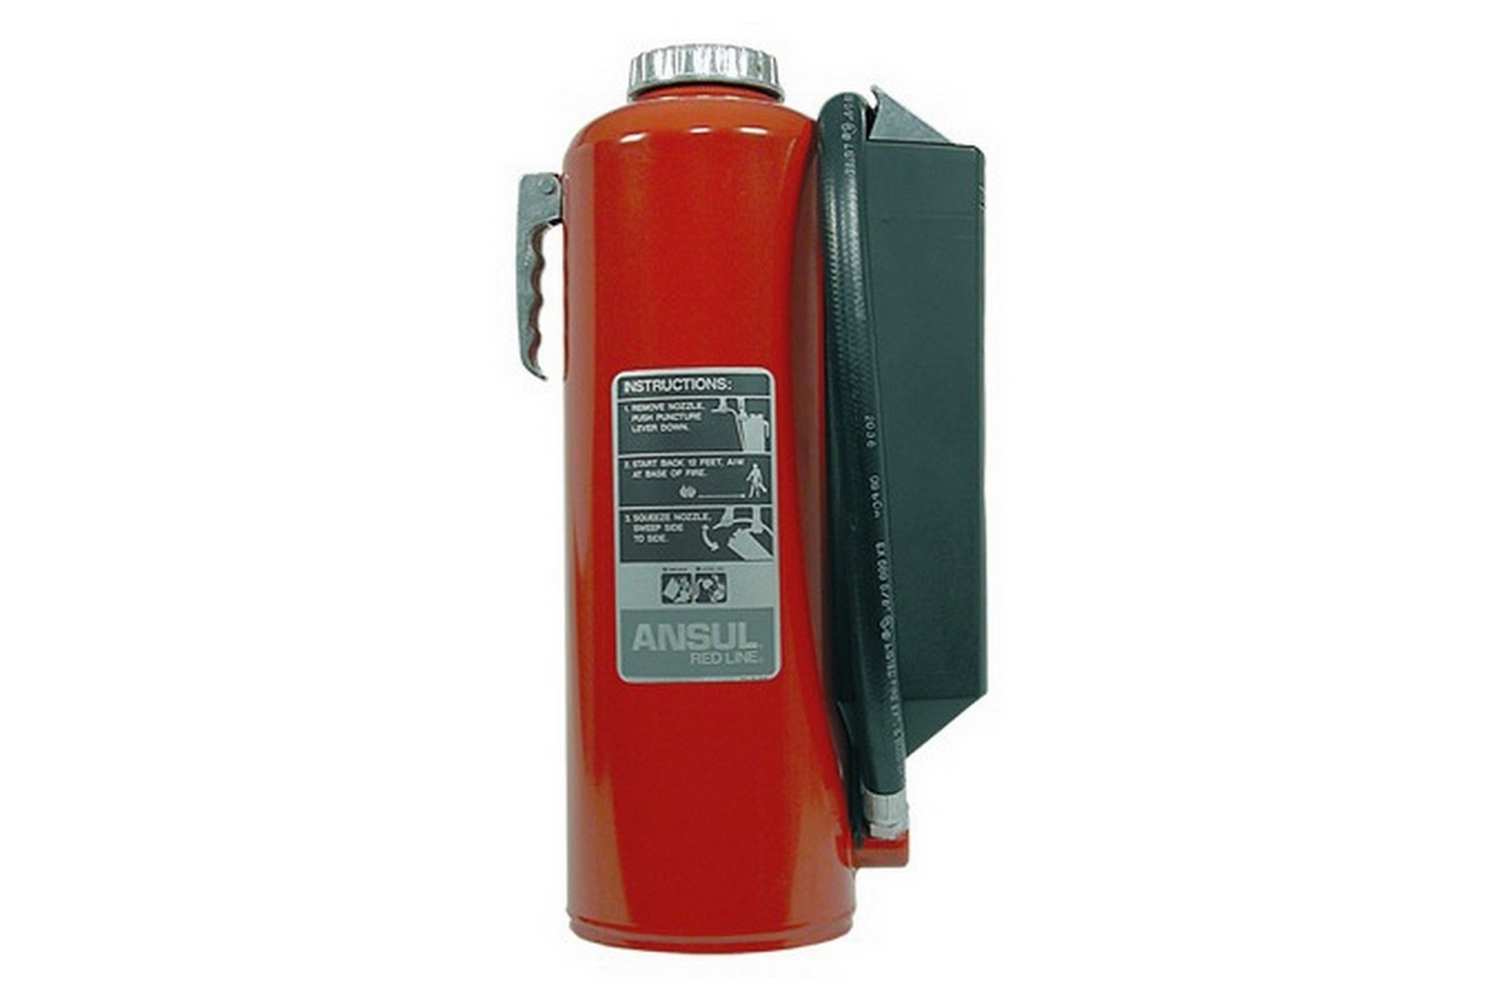 Selecting a Cartridge Fire Extinguisher